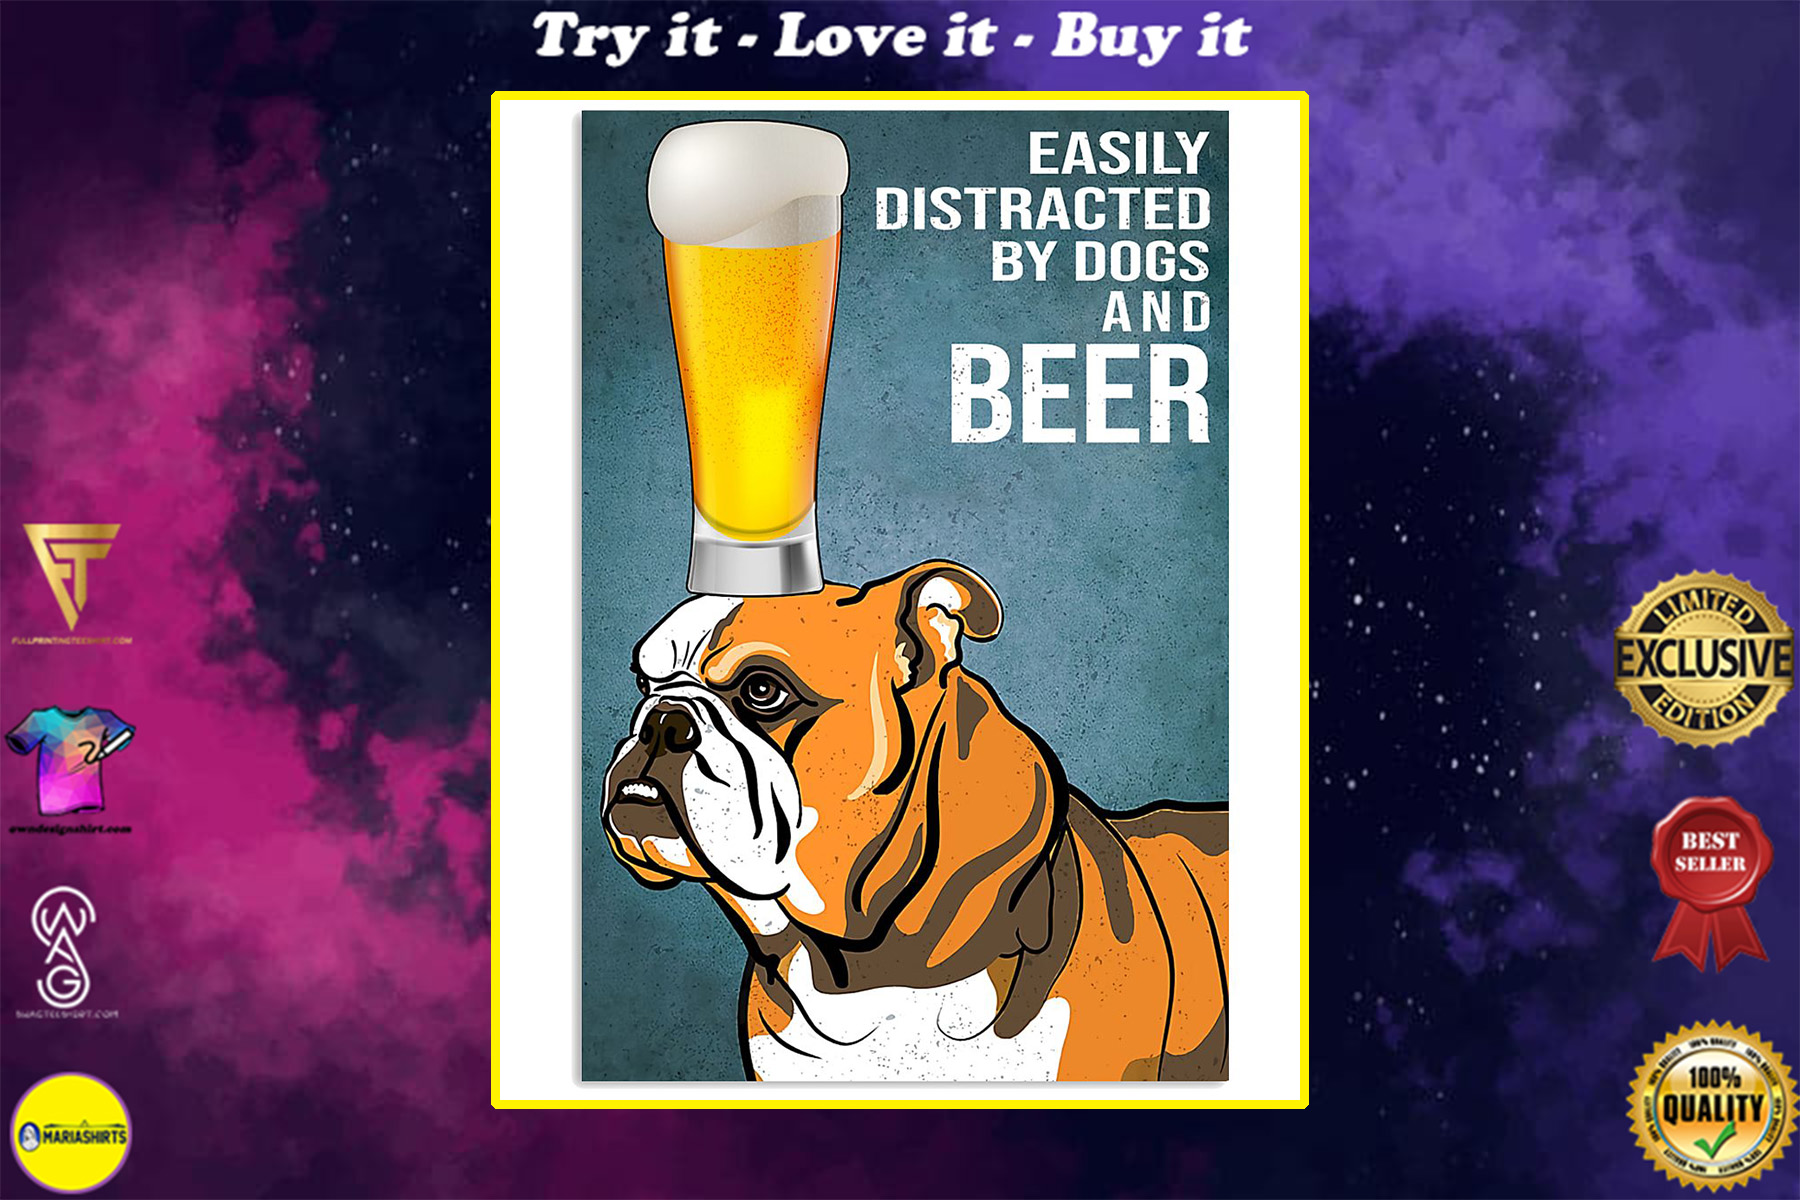 bulldog easily distracted by dogs and beer poster